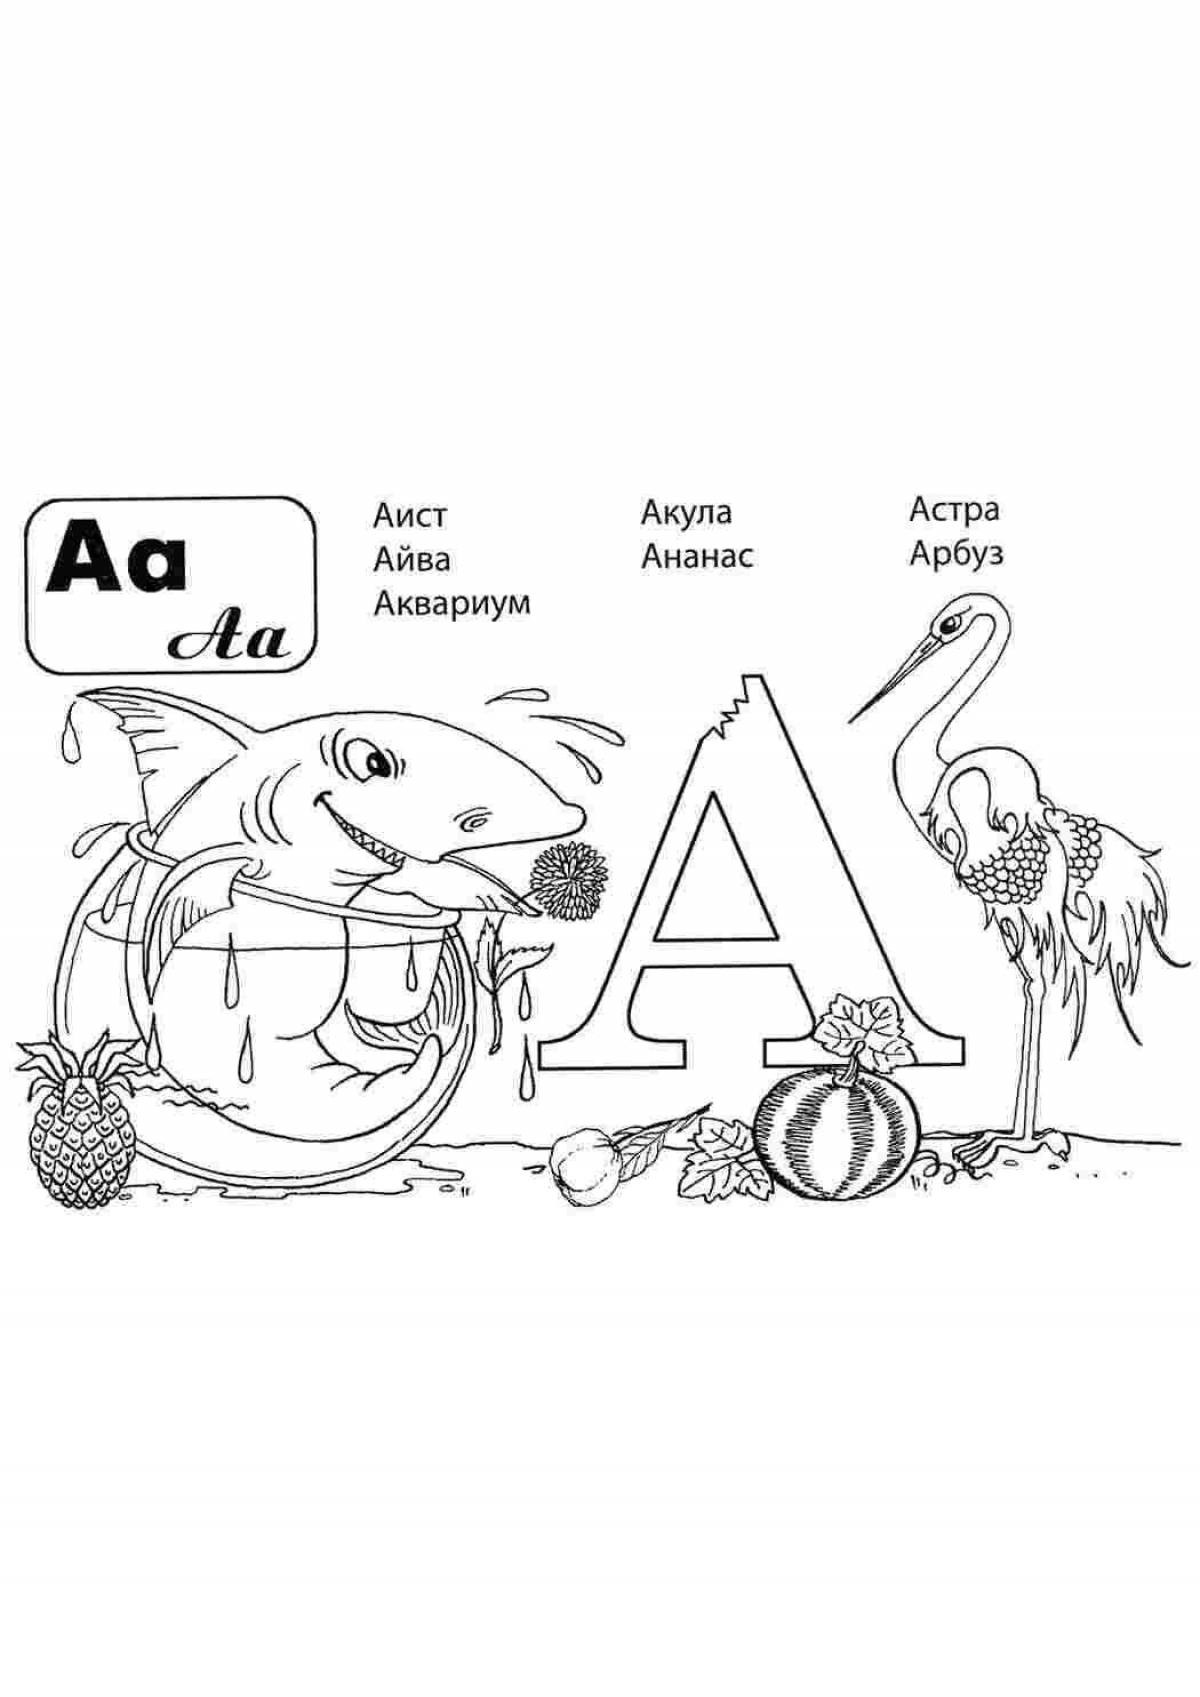 Alphabet knowledge coloring page